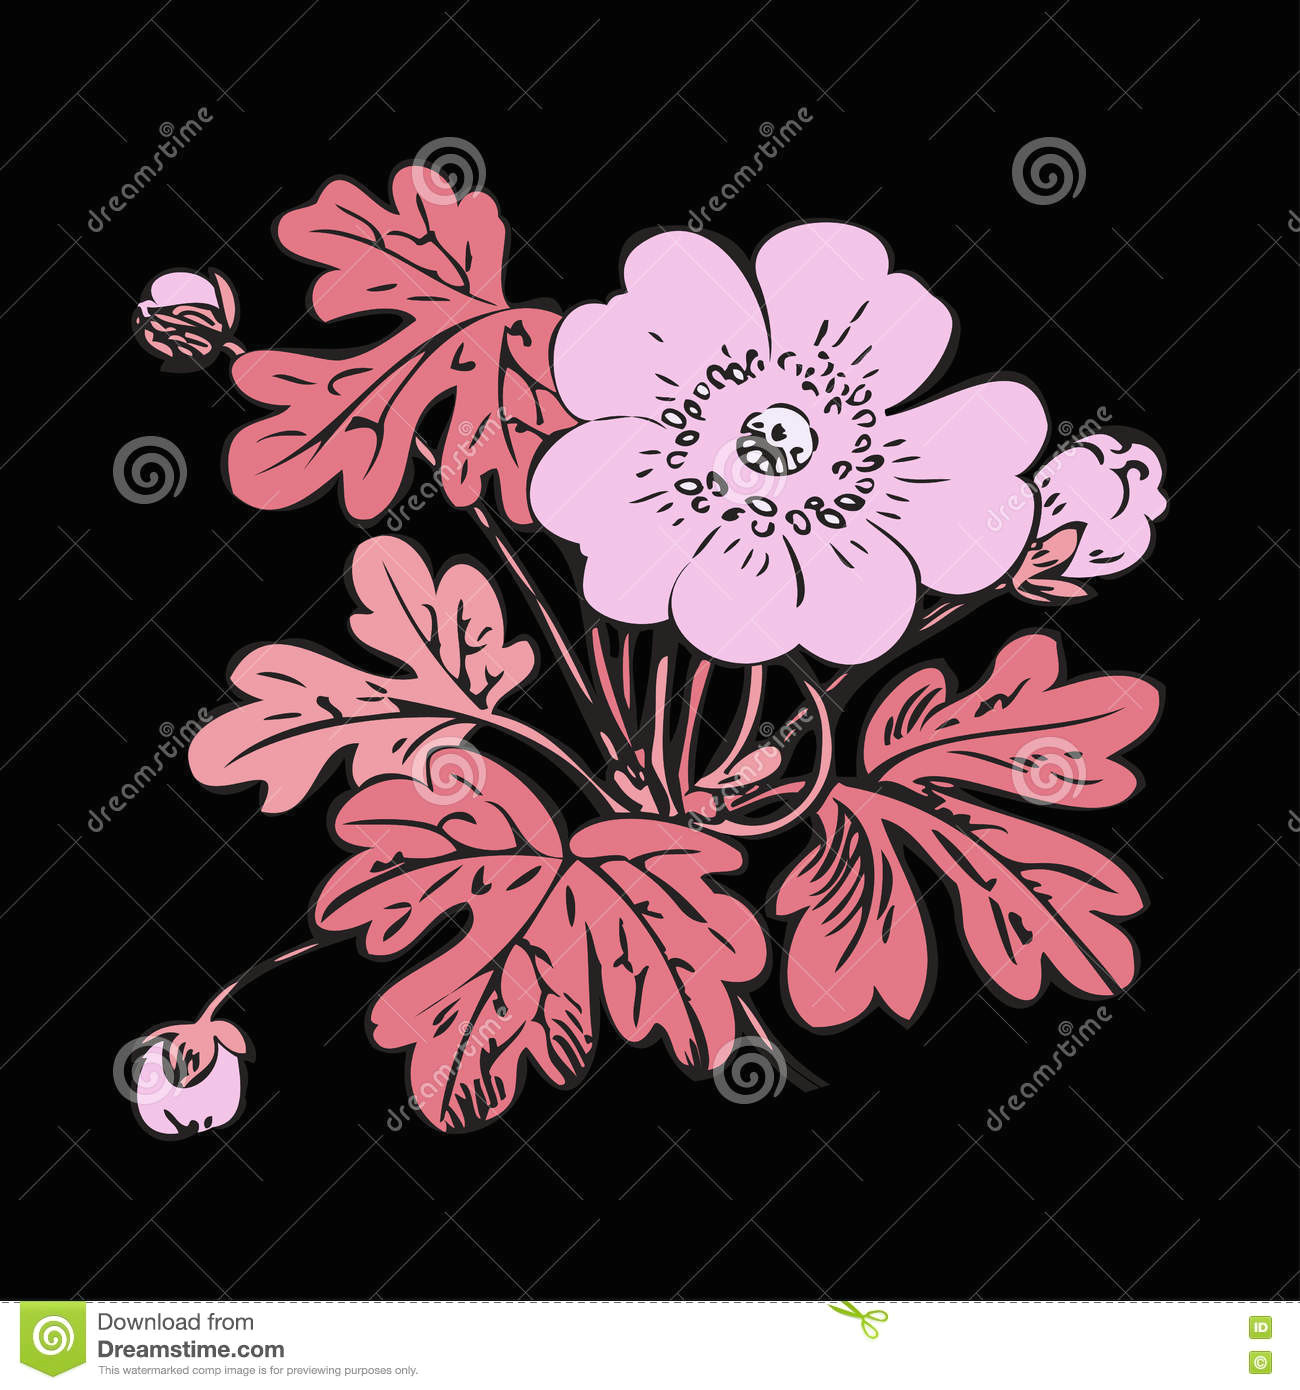 Close Up Drawings Of Flowers Floral Bush Retro On Black Background Hand Drawn Decorat Stock